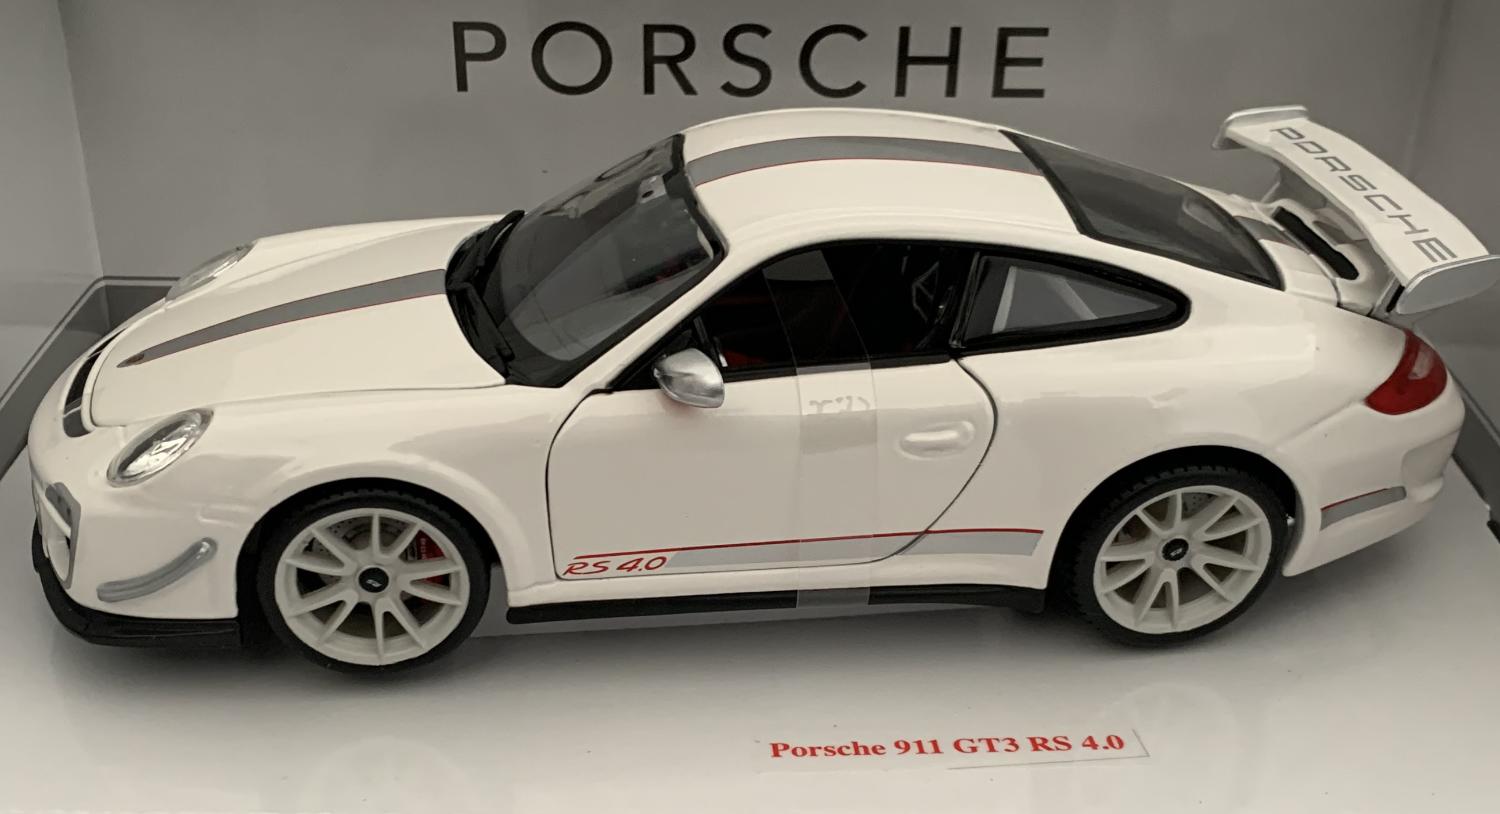 Porsche 911 GT3 RS 4.0 in white with white wheels 1:18 scale model from Bburago